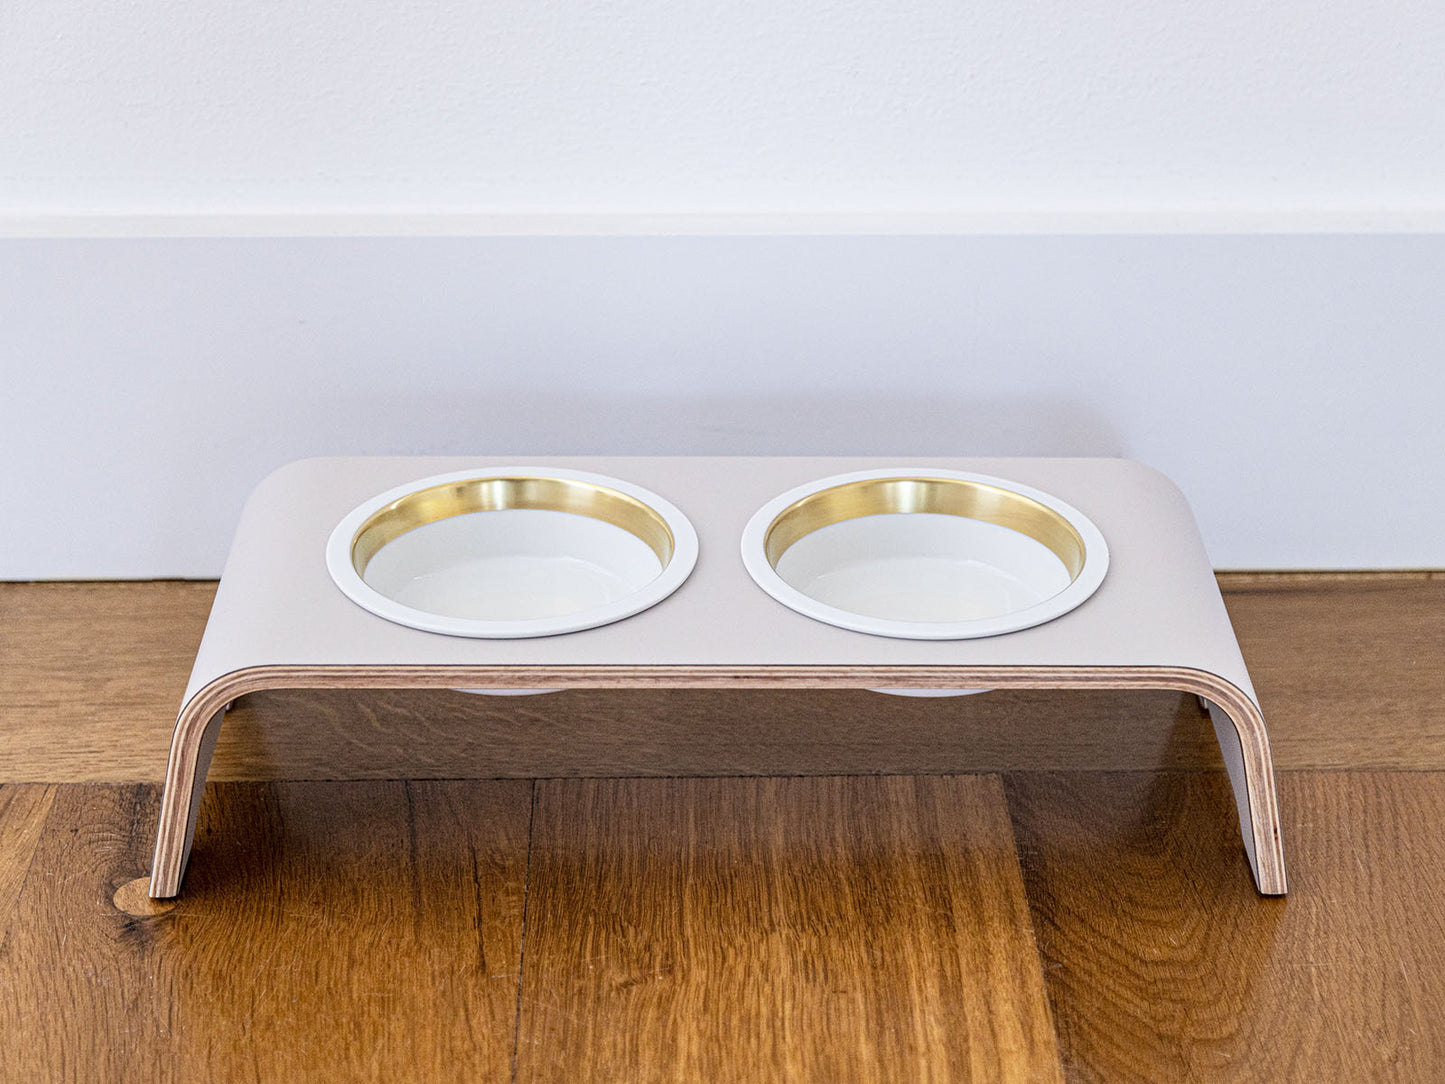 Surcharge GOLD Edition for a porcelain bowl of the dogBar® S or S-large